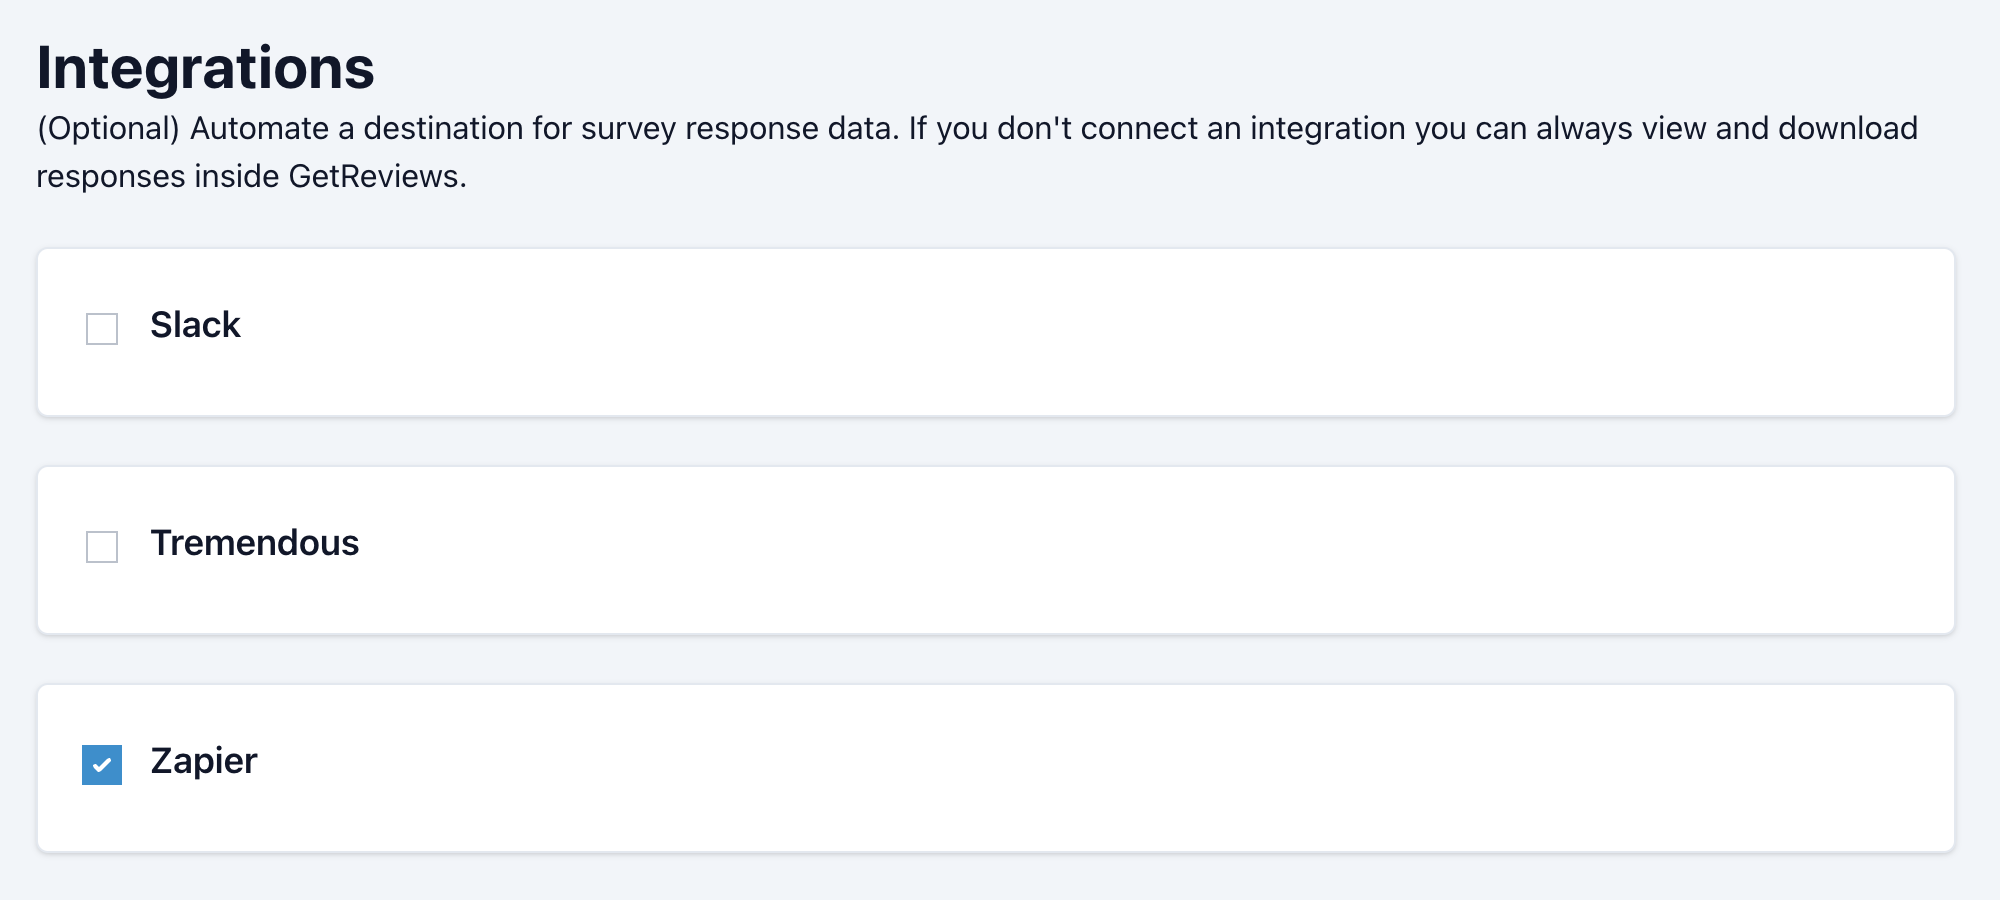 Zapier to GetReviews survey enablement